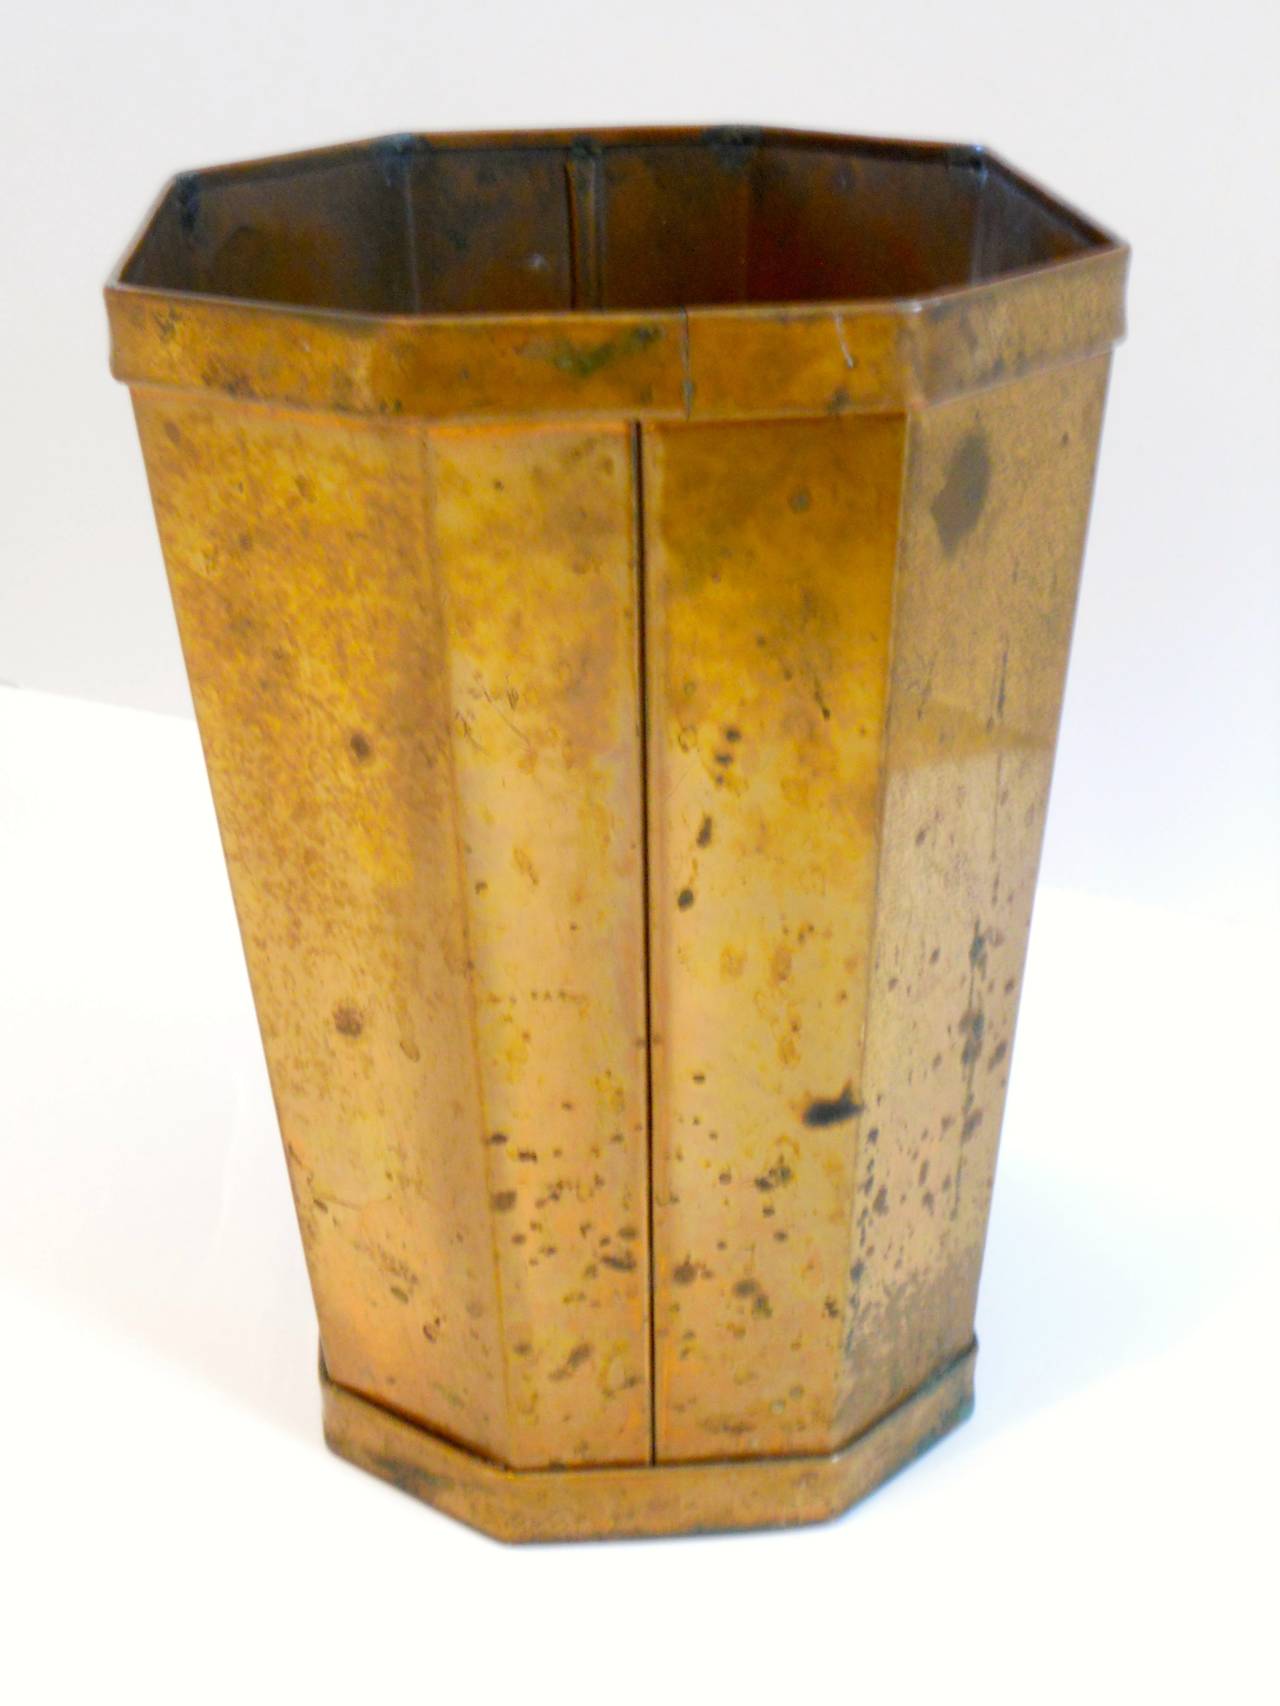 Charming copper waste bin or trash can with great pagination throughout.